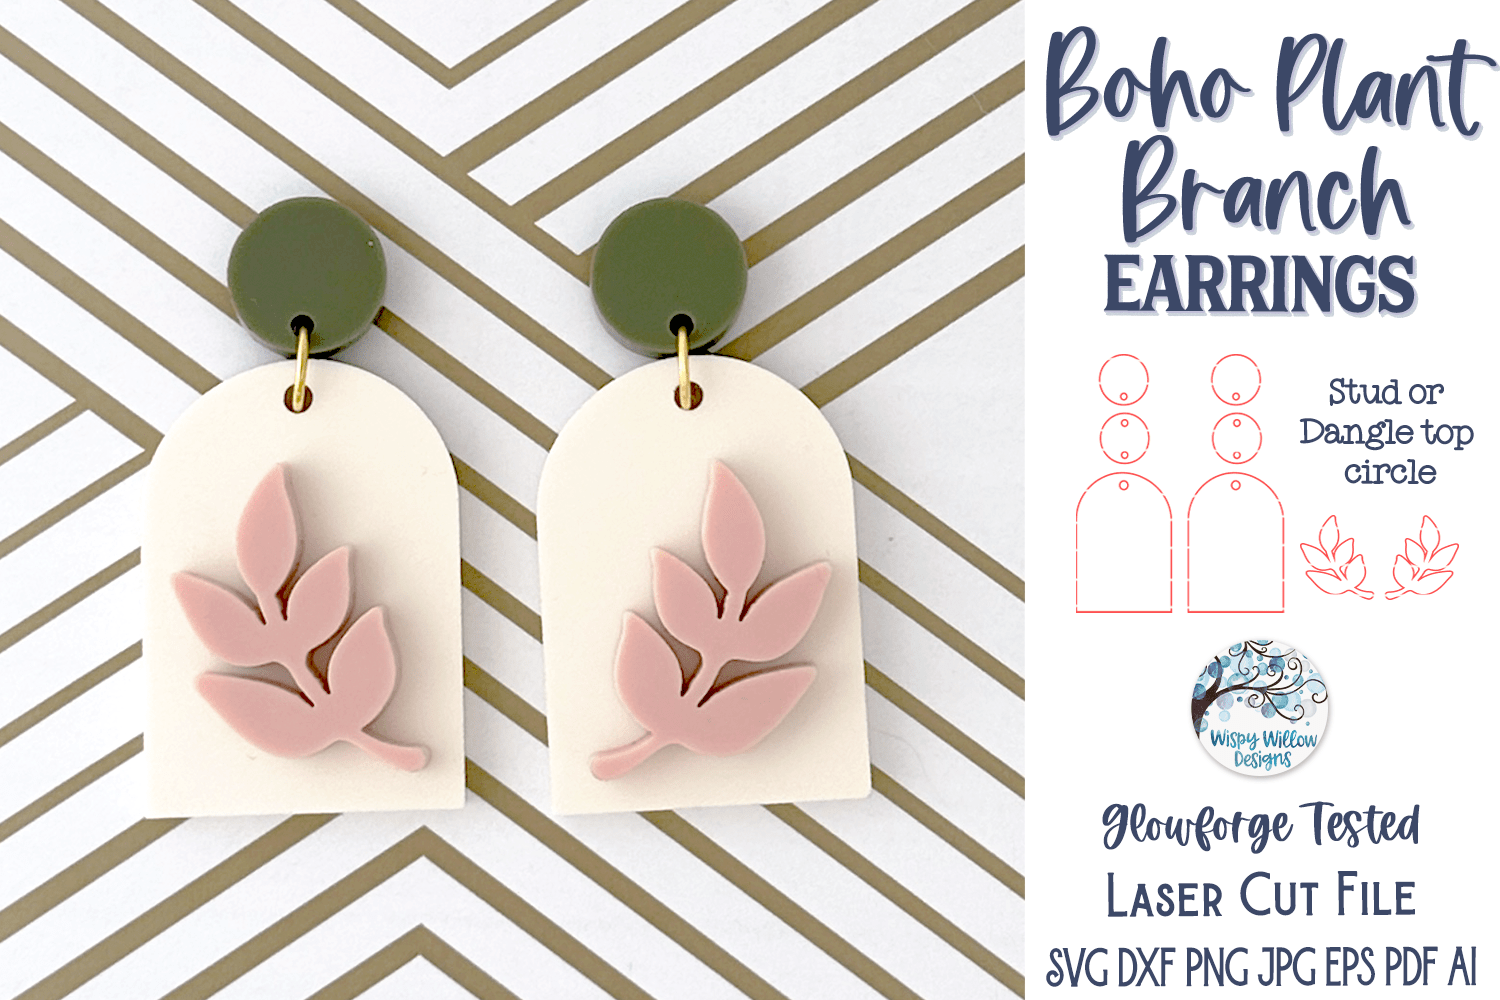 Boho Plant Branch Earring SVG for Glowforge Laser Cutter Wispy Willow Designs Company